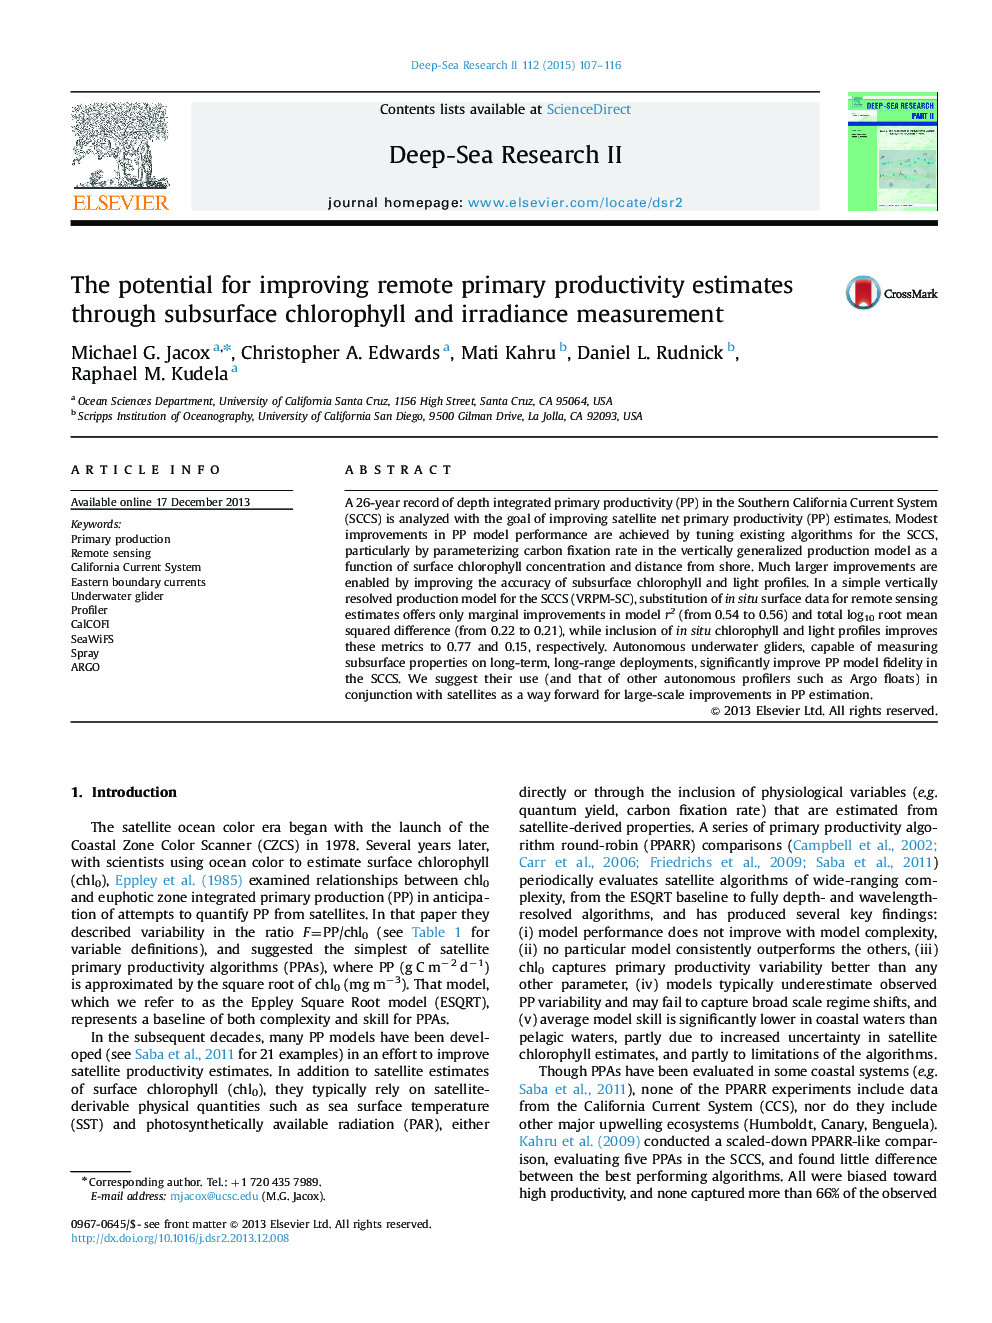 The potential for improving remote primary productivity estimates through subsurface chlorophyll and irradiance measurement